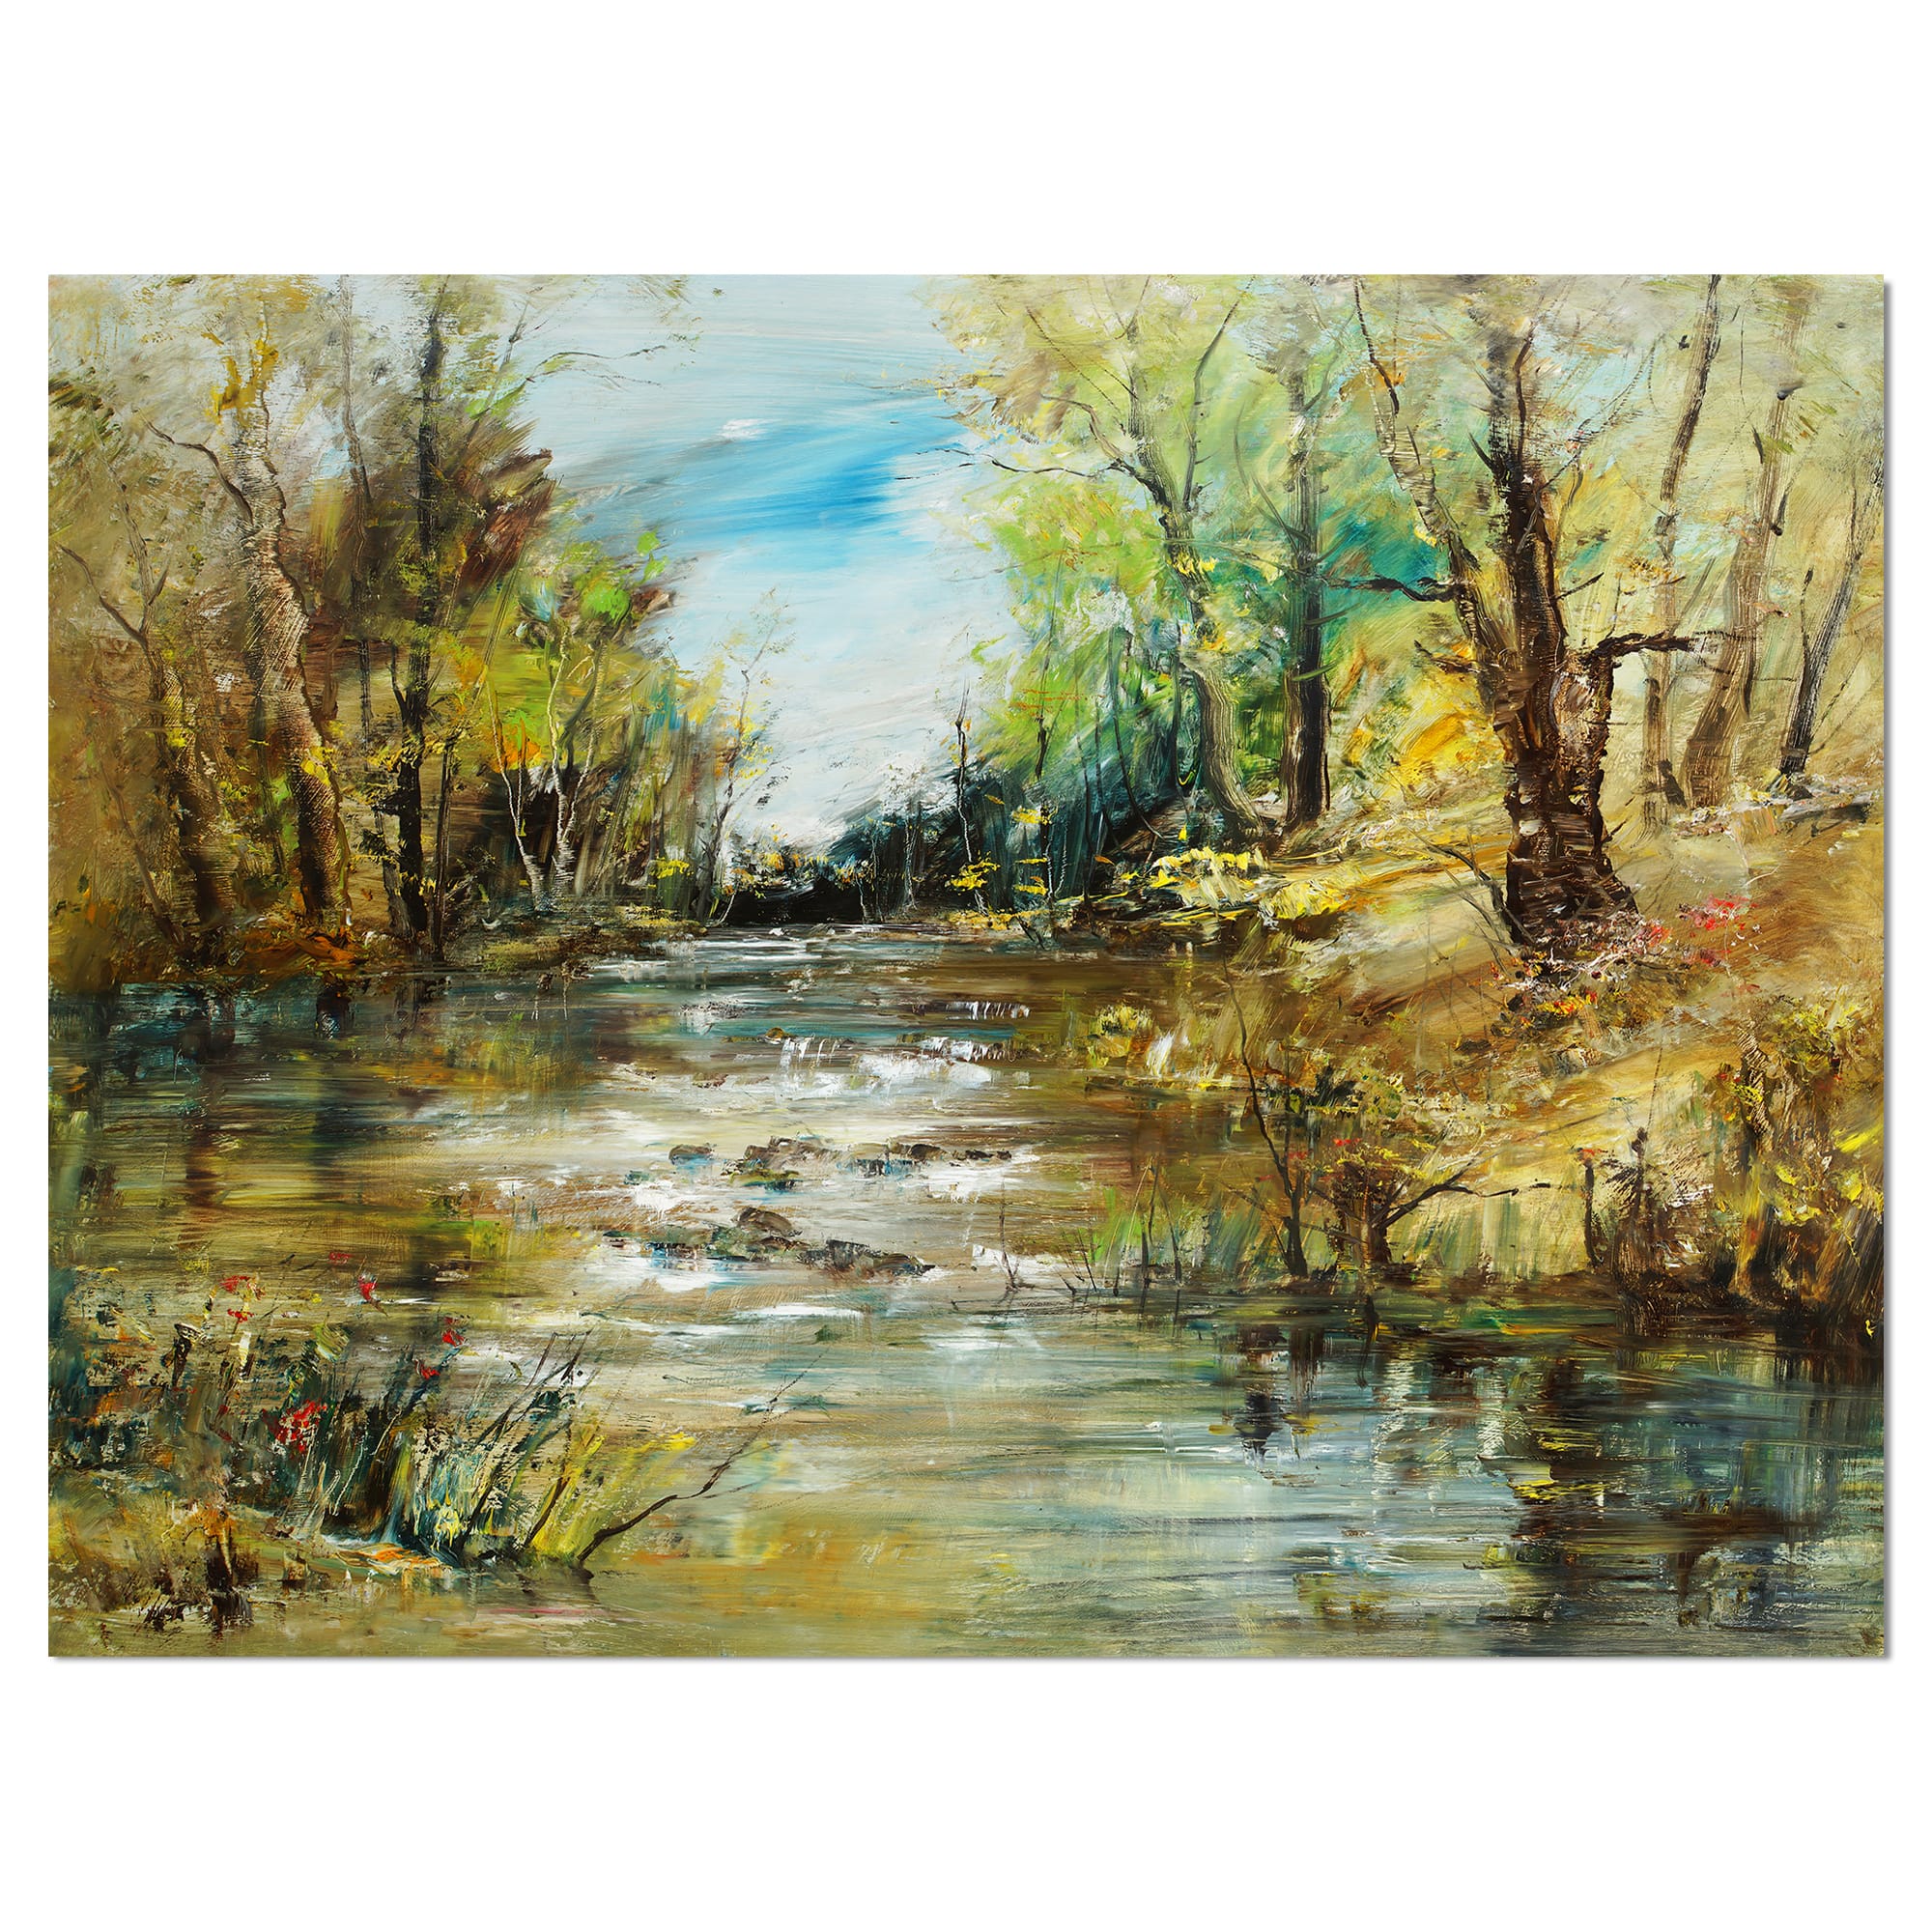 Designart - Trees by the River - Landscapes Painting Print on Wrapped Canvas